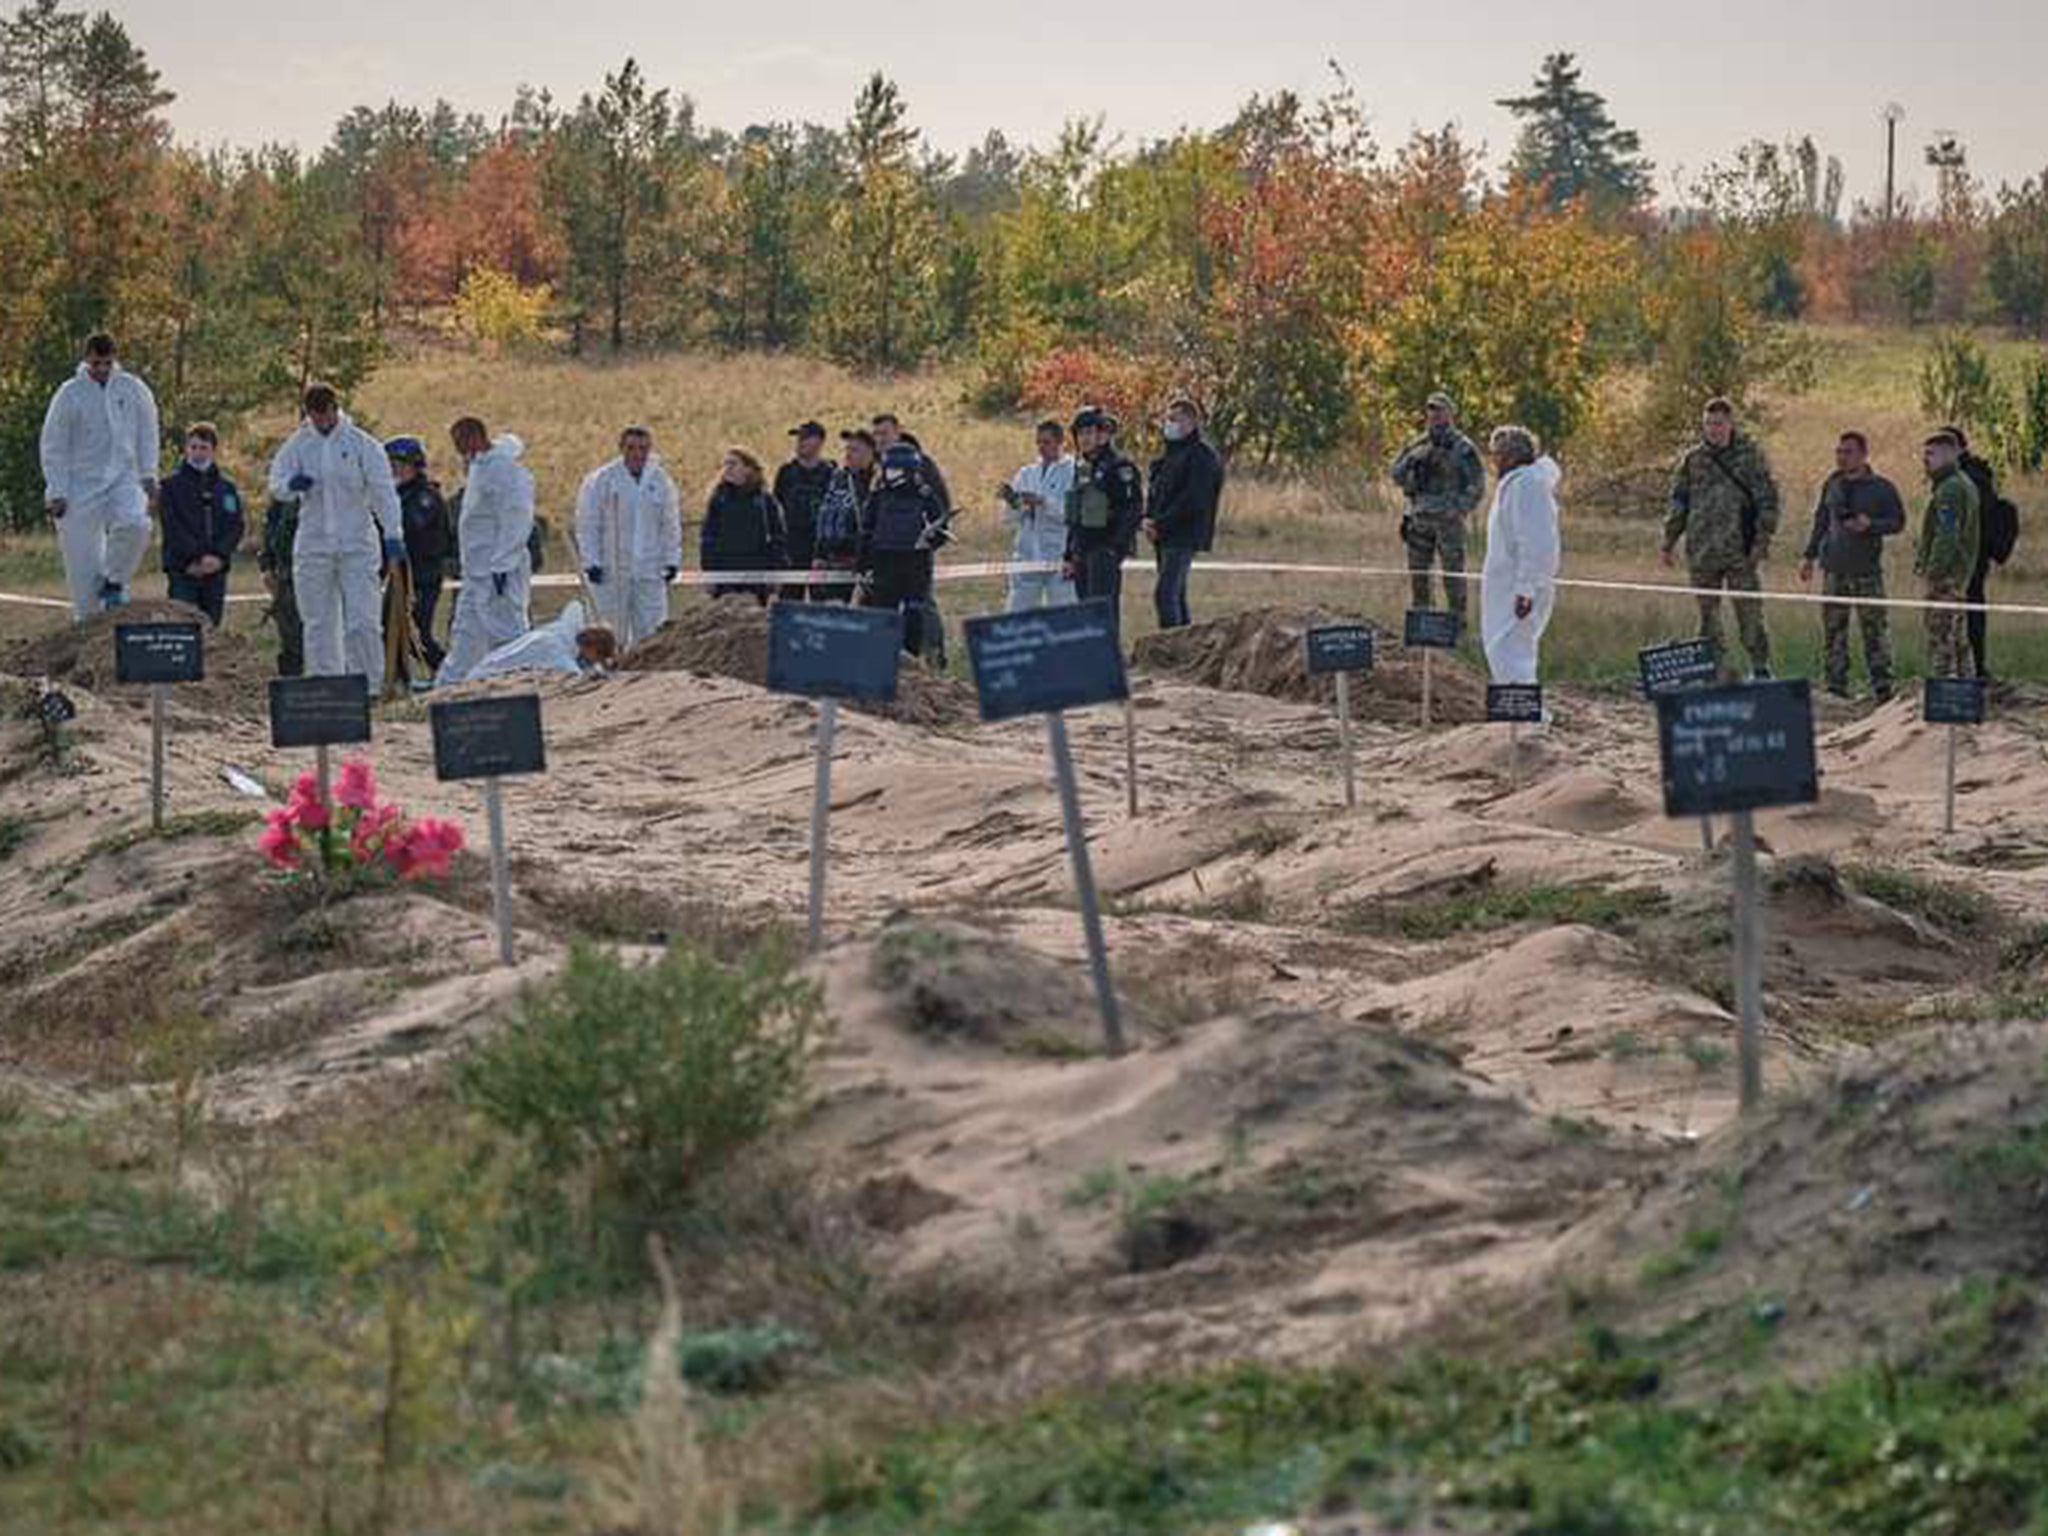 Forensic technicians and officers work at a burial site